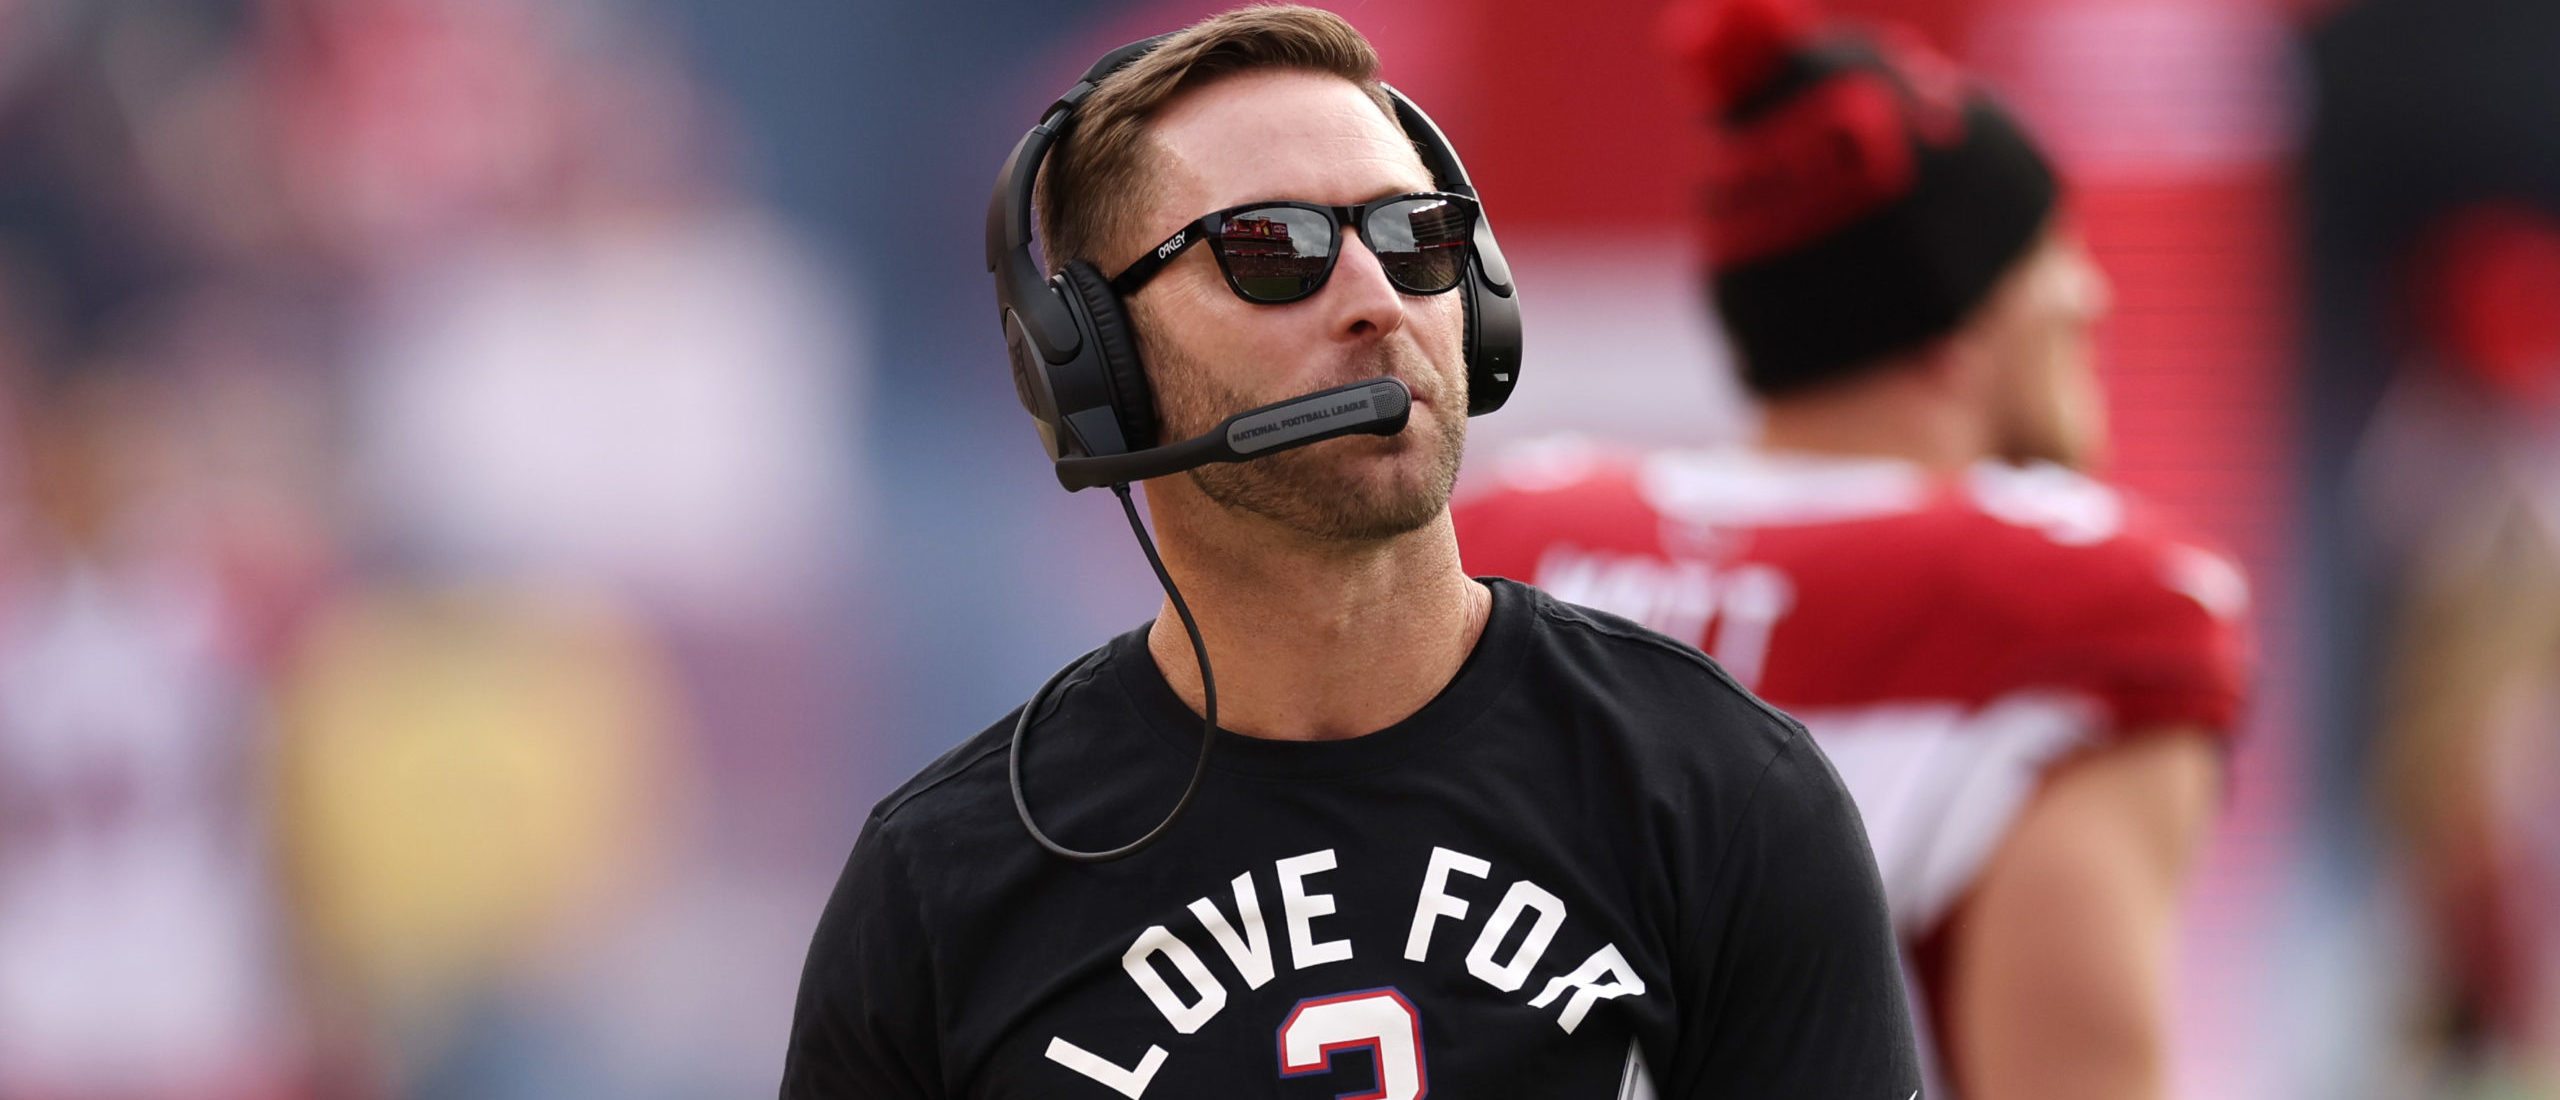 Raiders Makes Electric Coaching Pickup With Kingsbury And I Can’t Wait To See This Offense